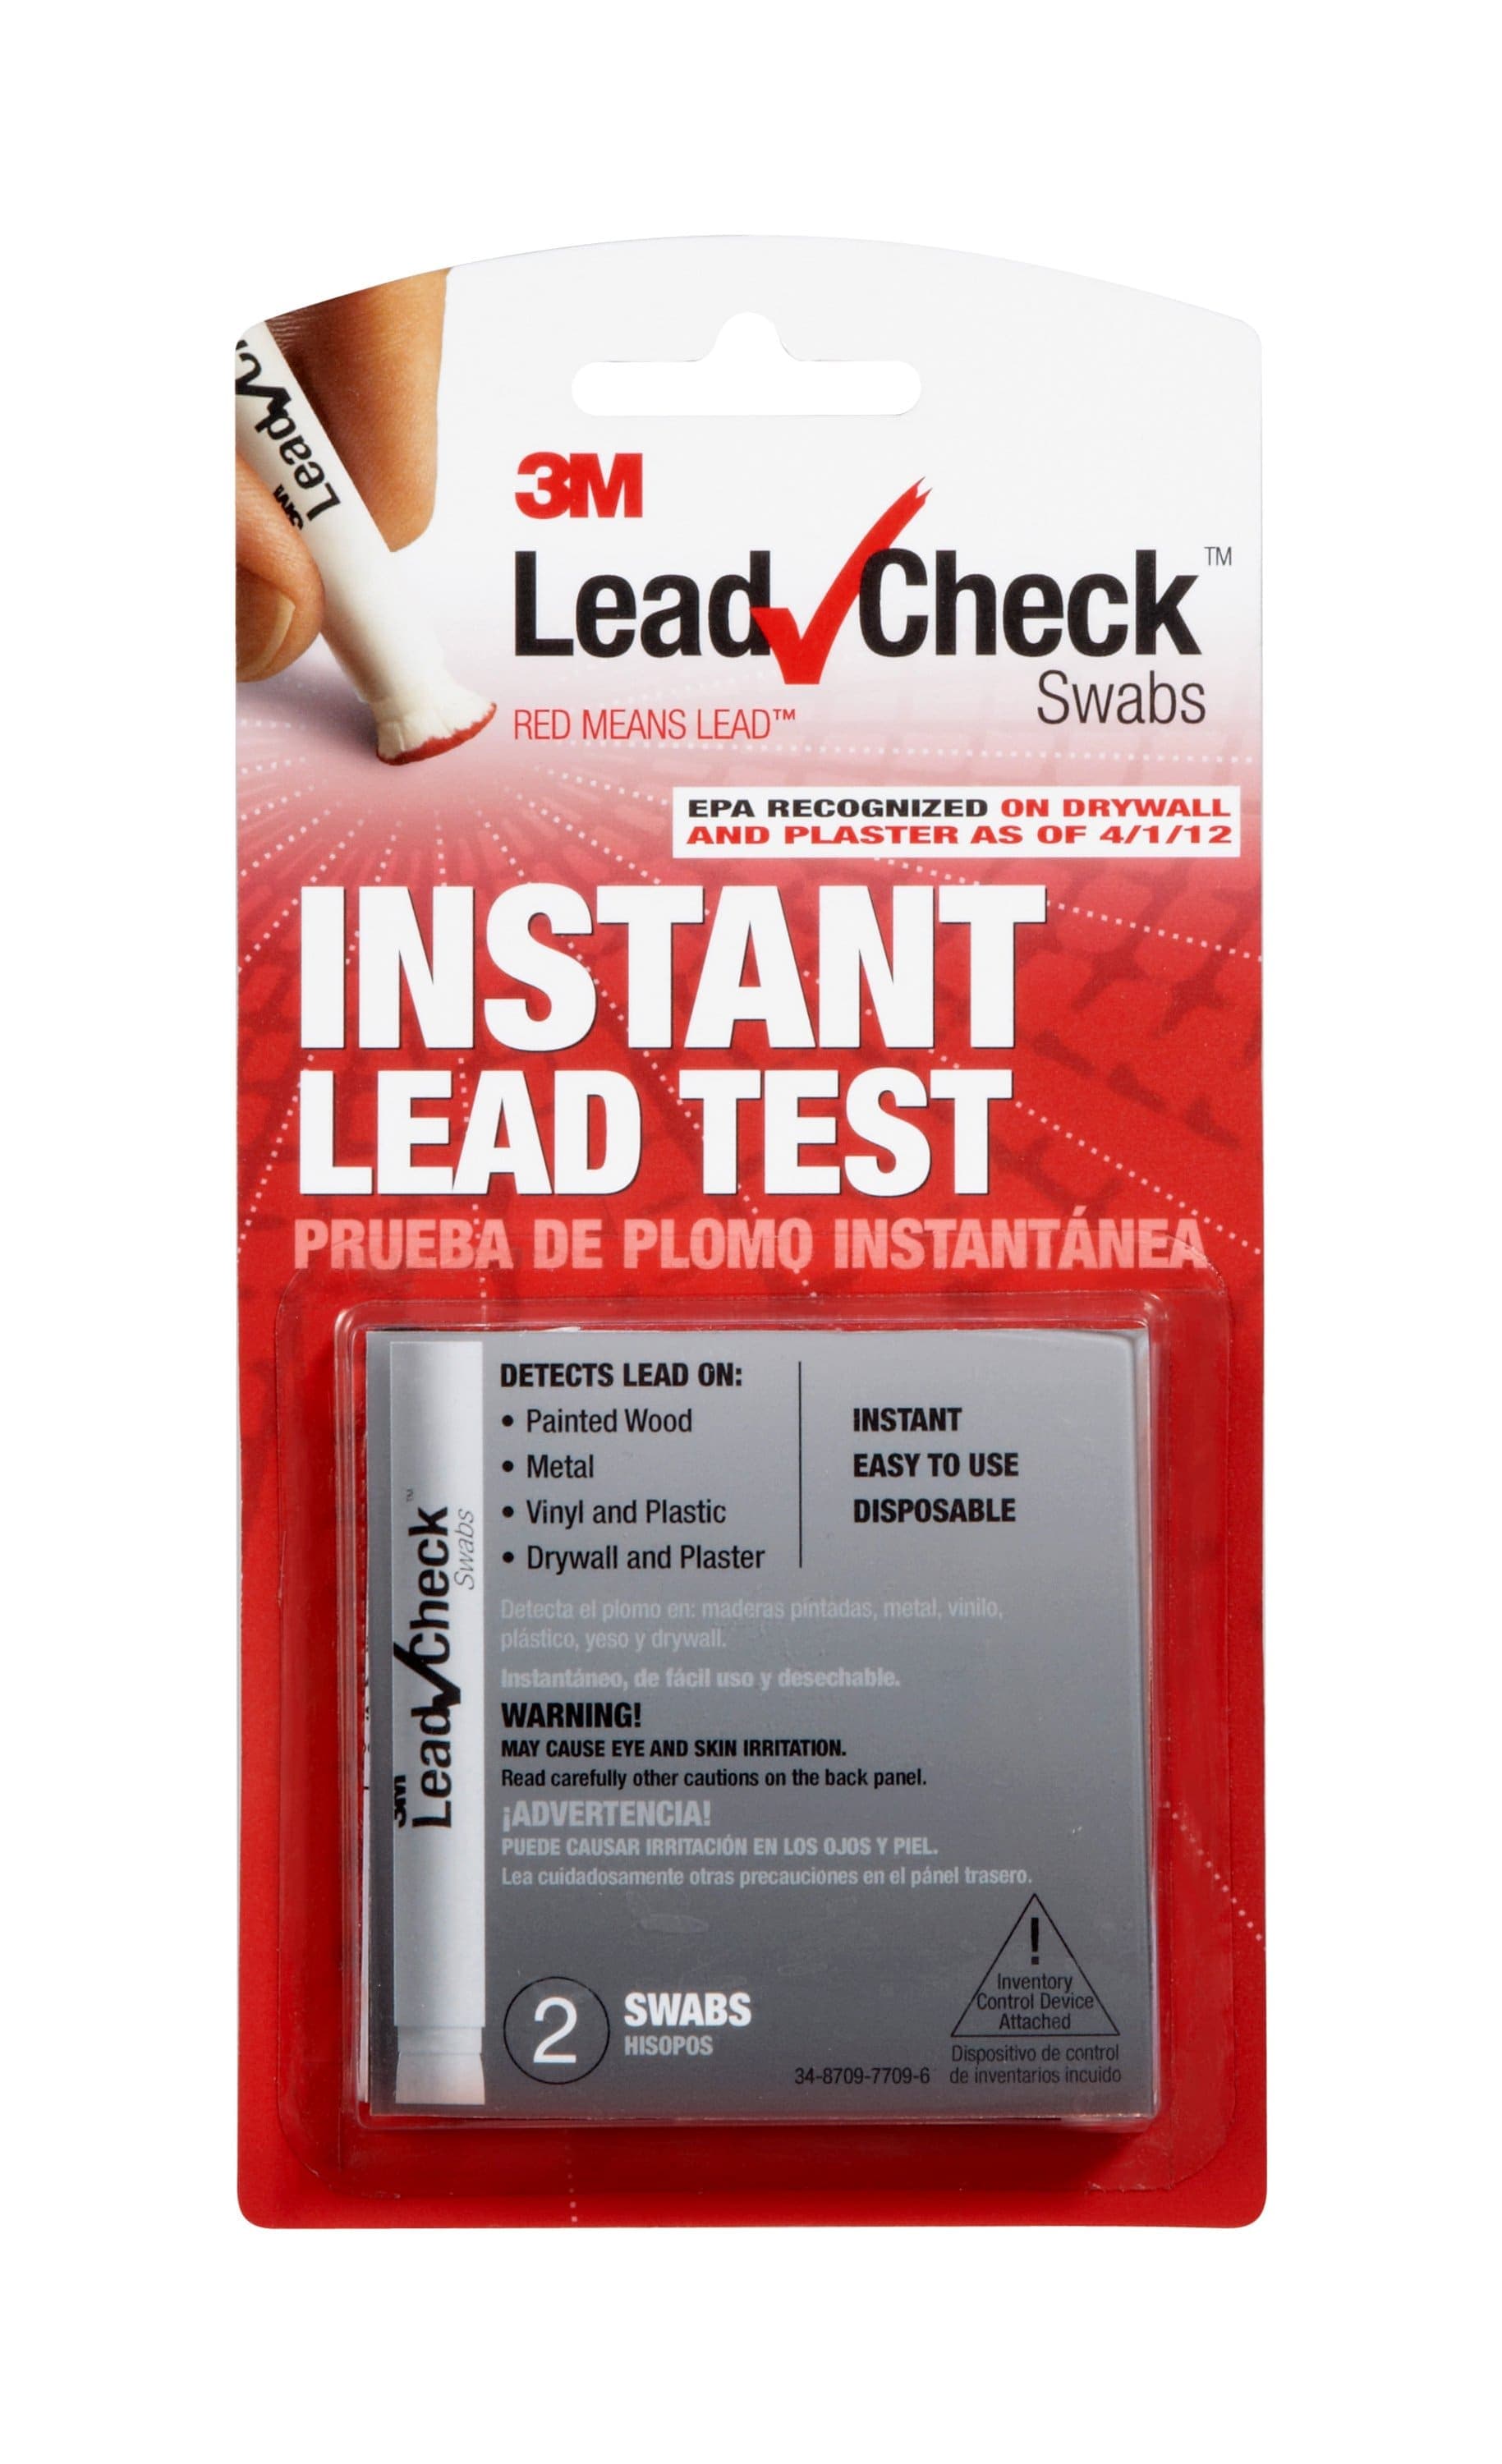 10 3M Lead Check Swabs EPA Reconized Aa2jp10 for sale online